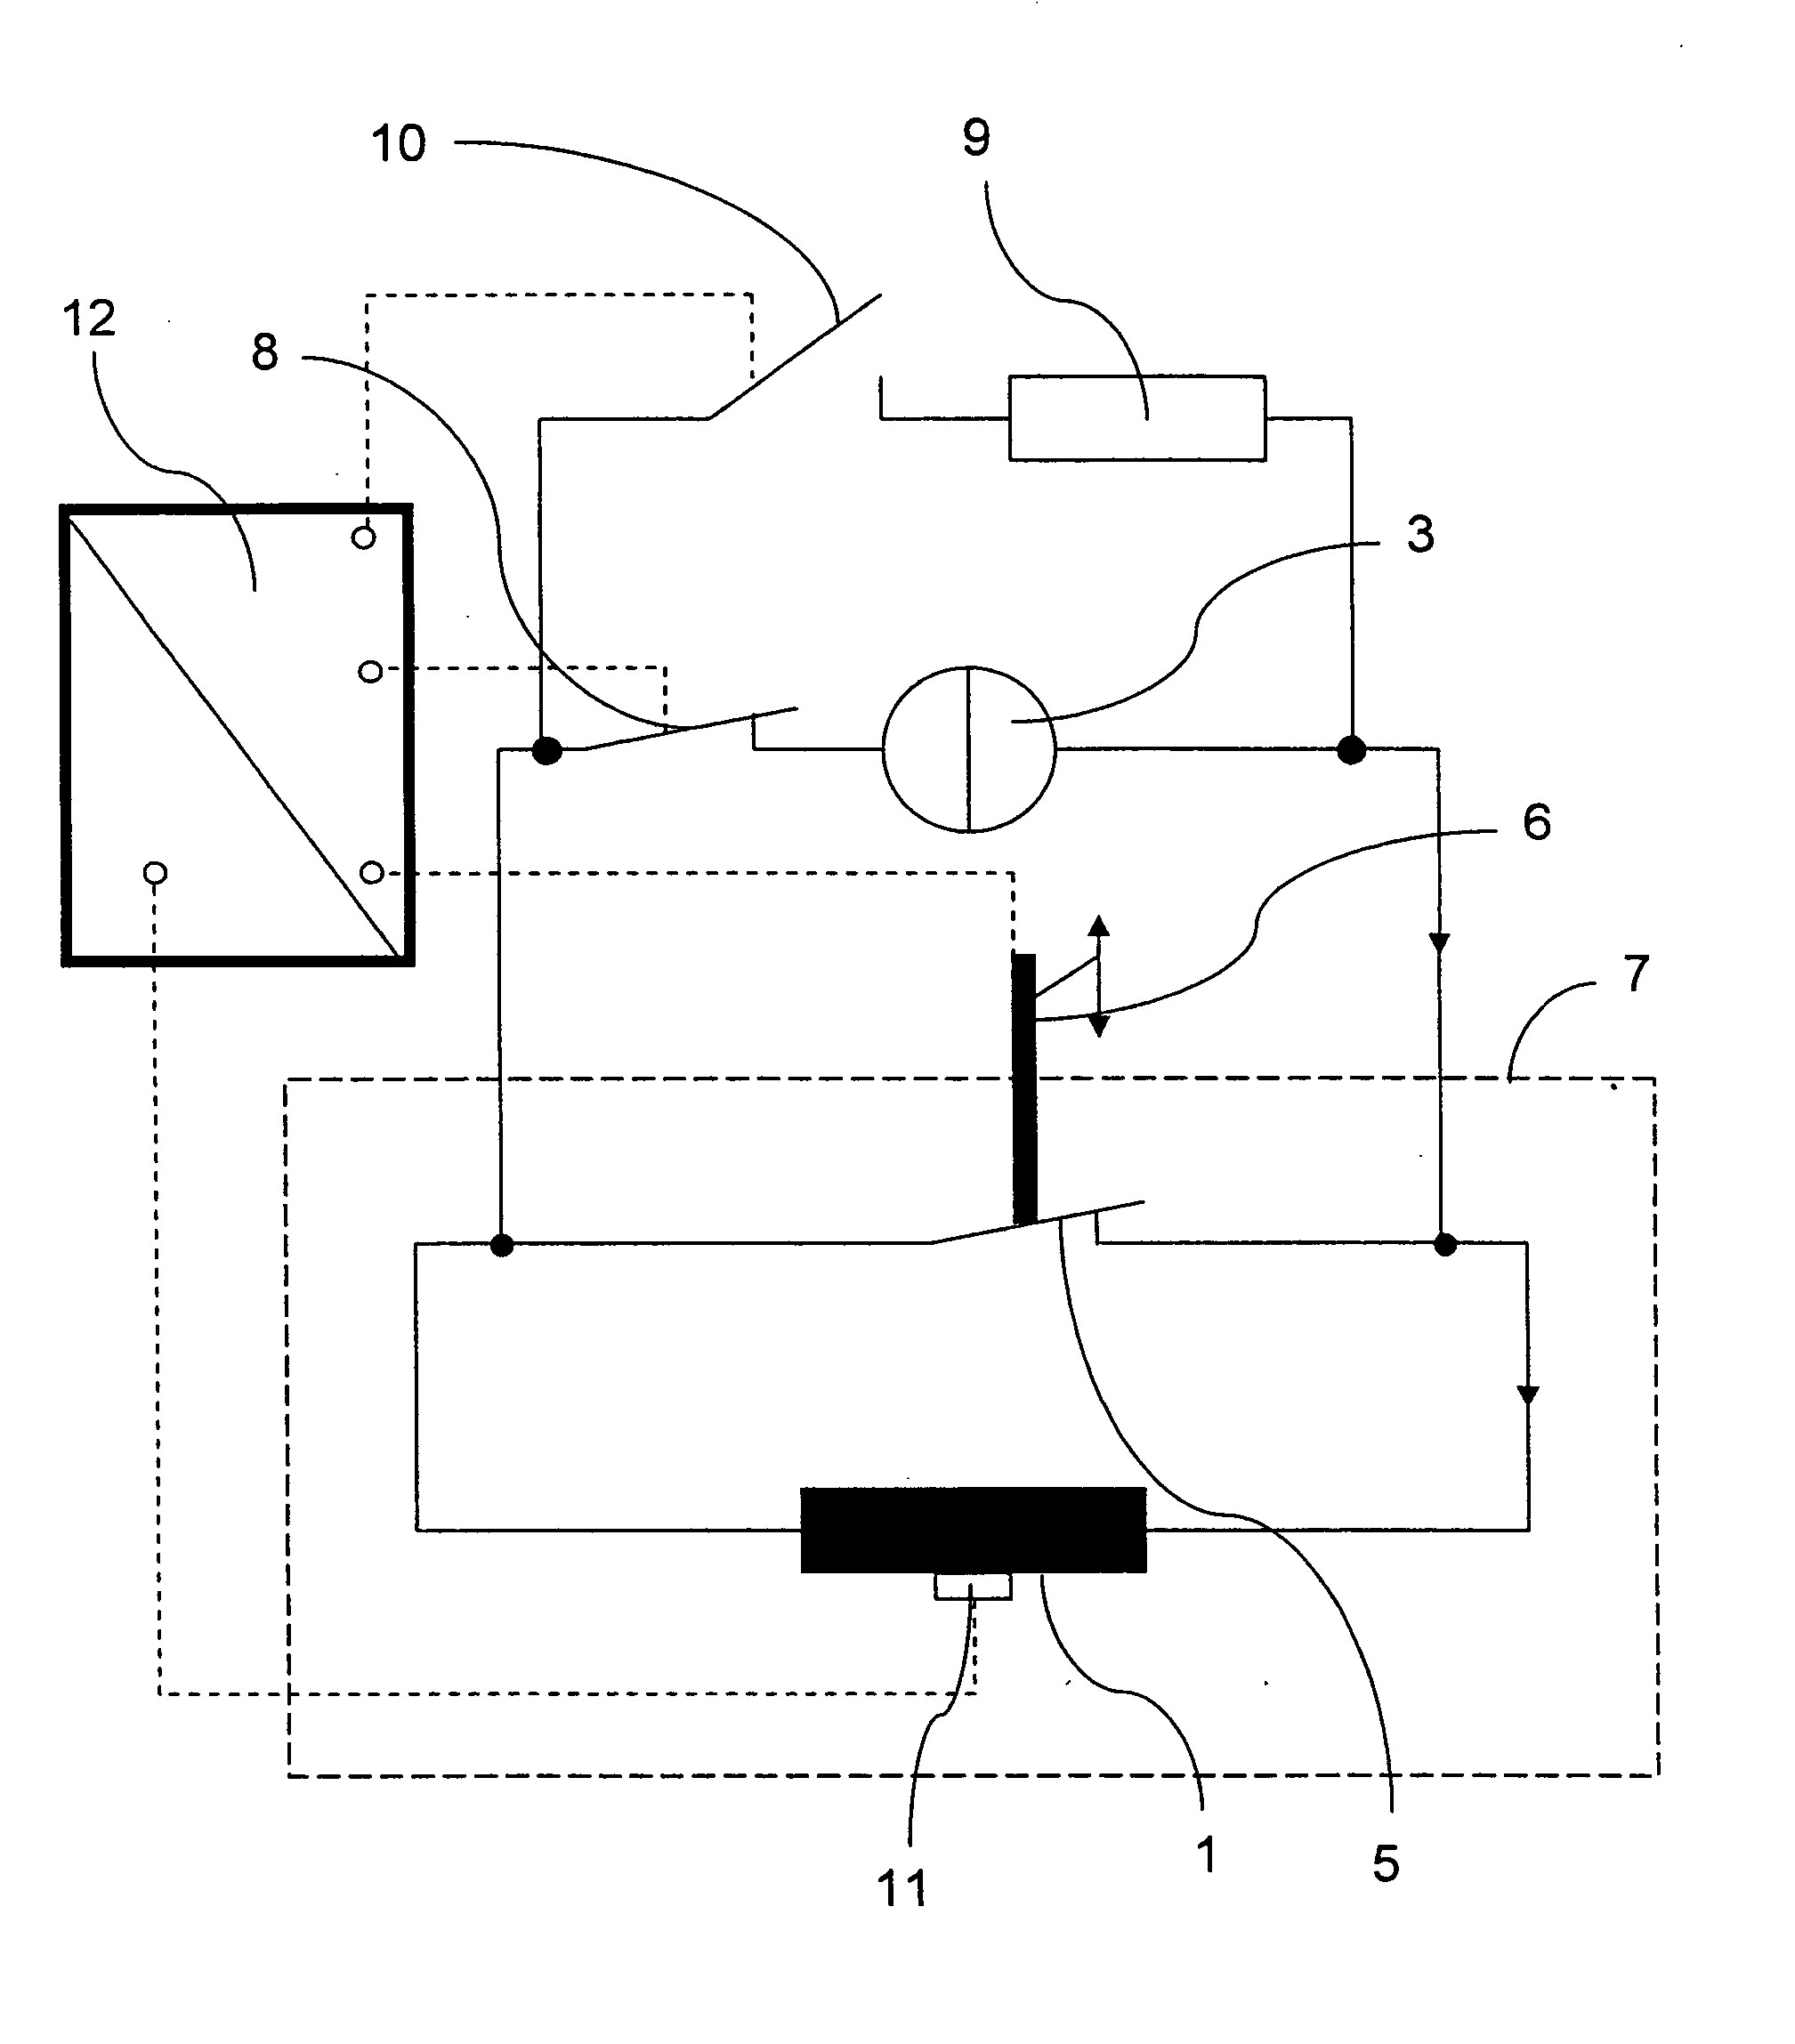 Superconducting magnet configuration with switch